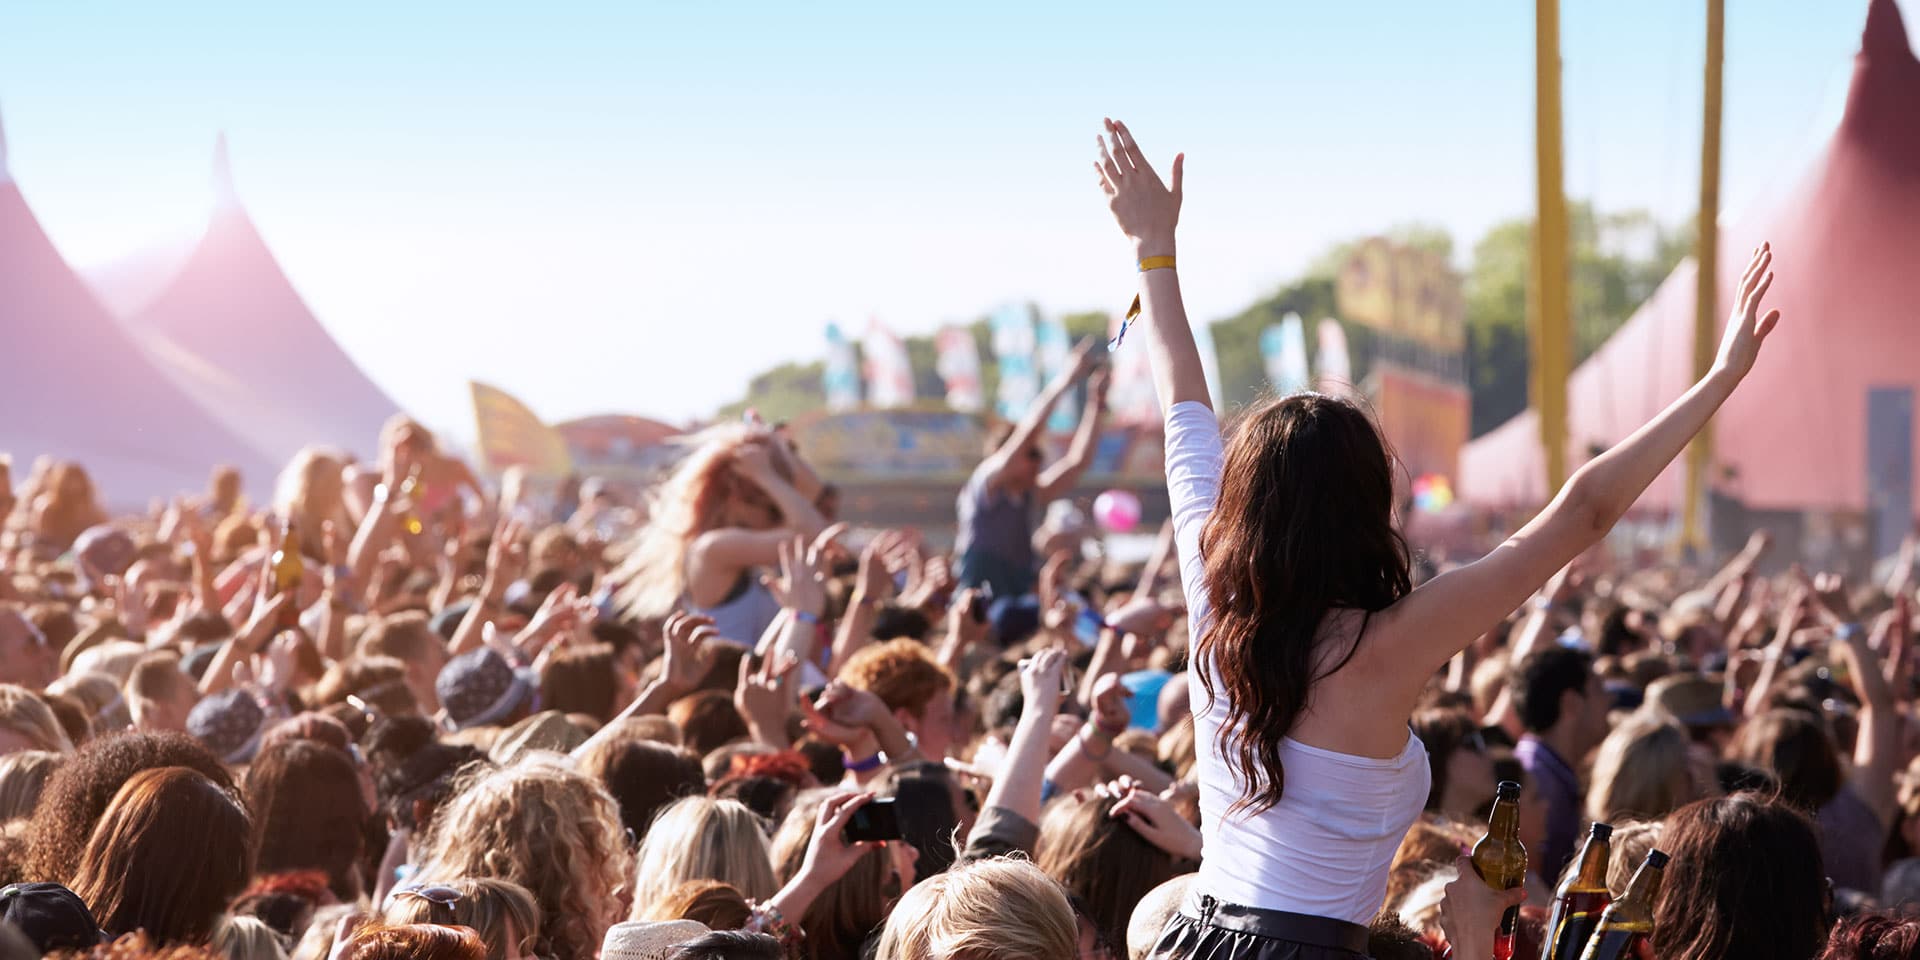 Over Coachella? Hit Up the Hottest Music Fests in and Around Los Angeles